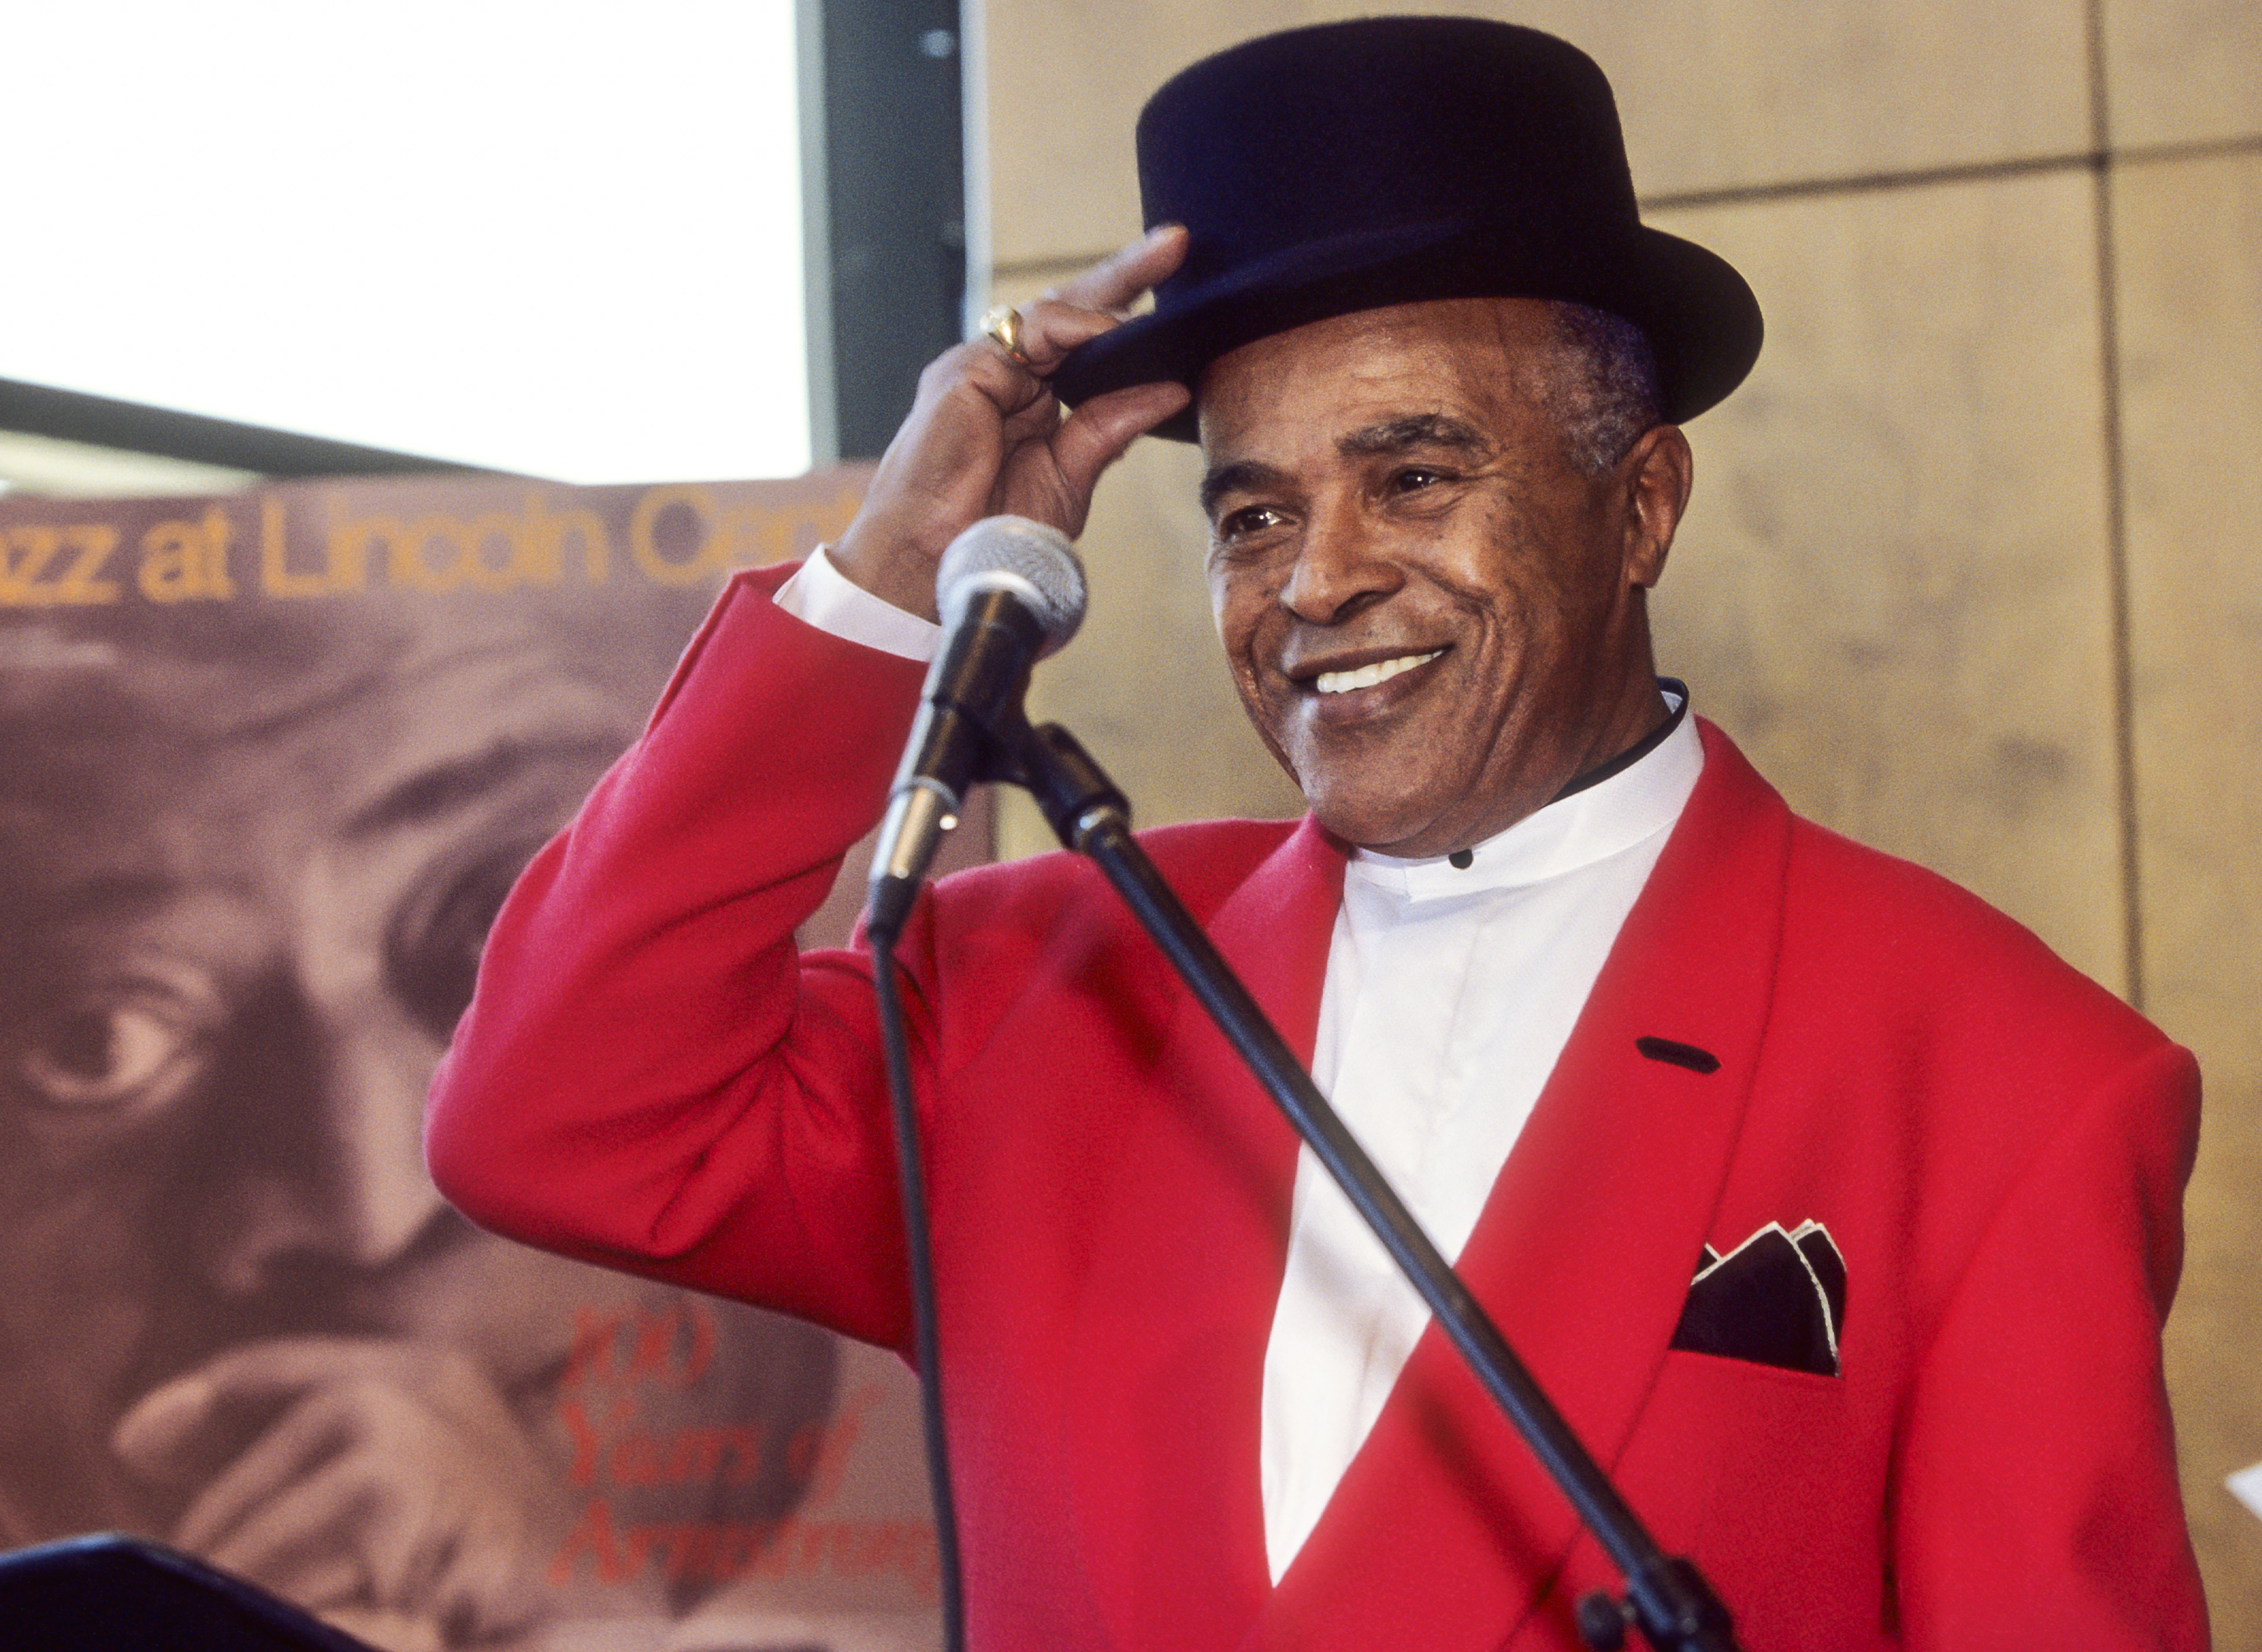 American Jazz musician Jon Hendricks tips his hat during a Jazz at Lincoln Center press conference on Feb. 1, 2000. (Jack Vartoogian—Getty Images)